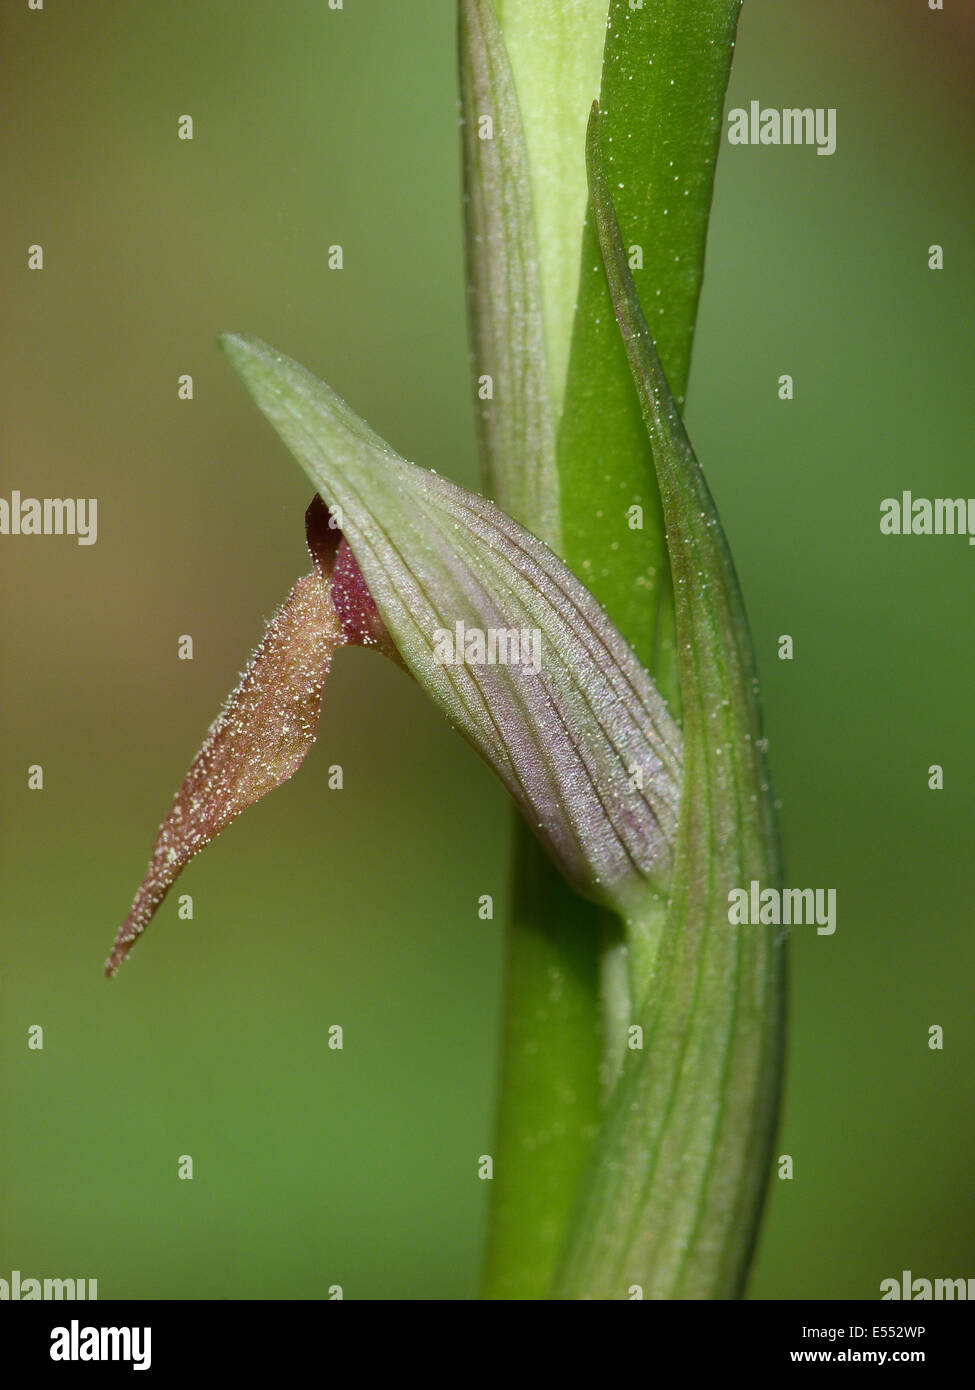 Small-flowered Tongue Orchid (Serapias parviflora) close-up of flower, Corsica, France, April Stock Photo